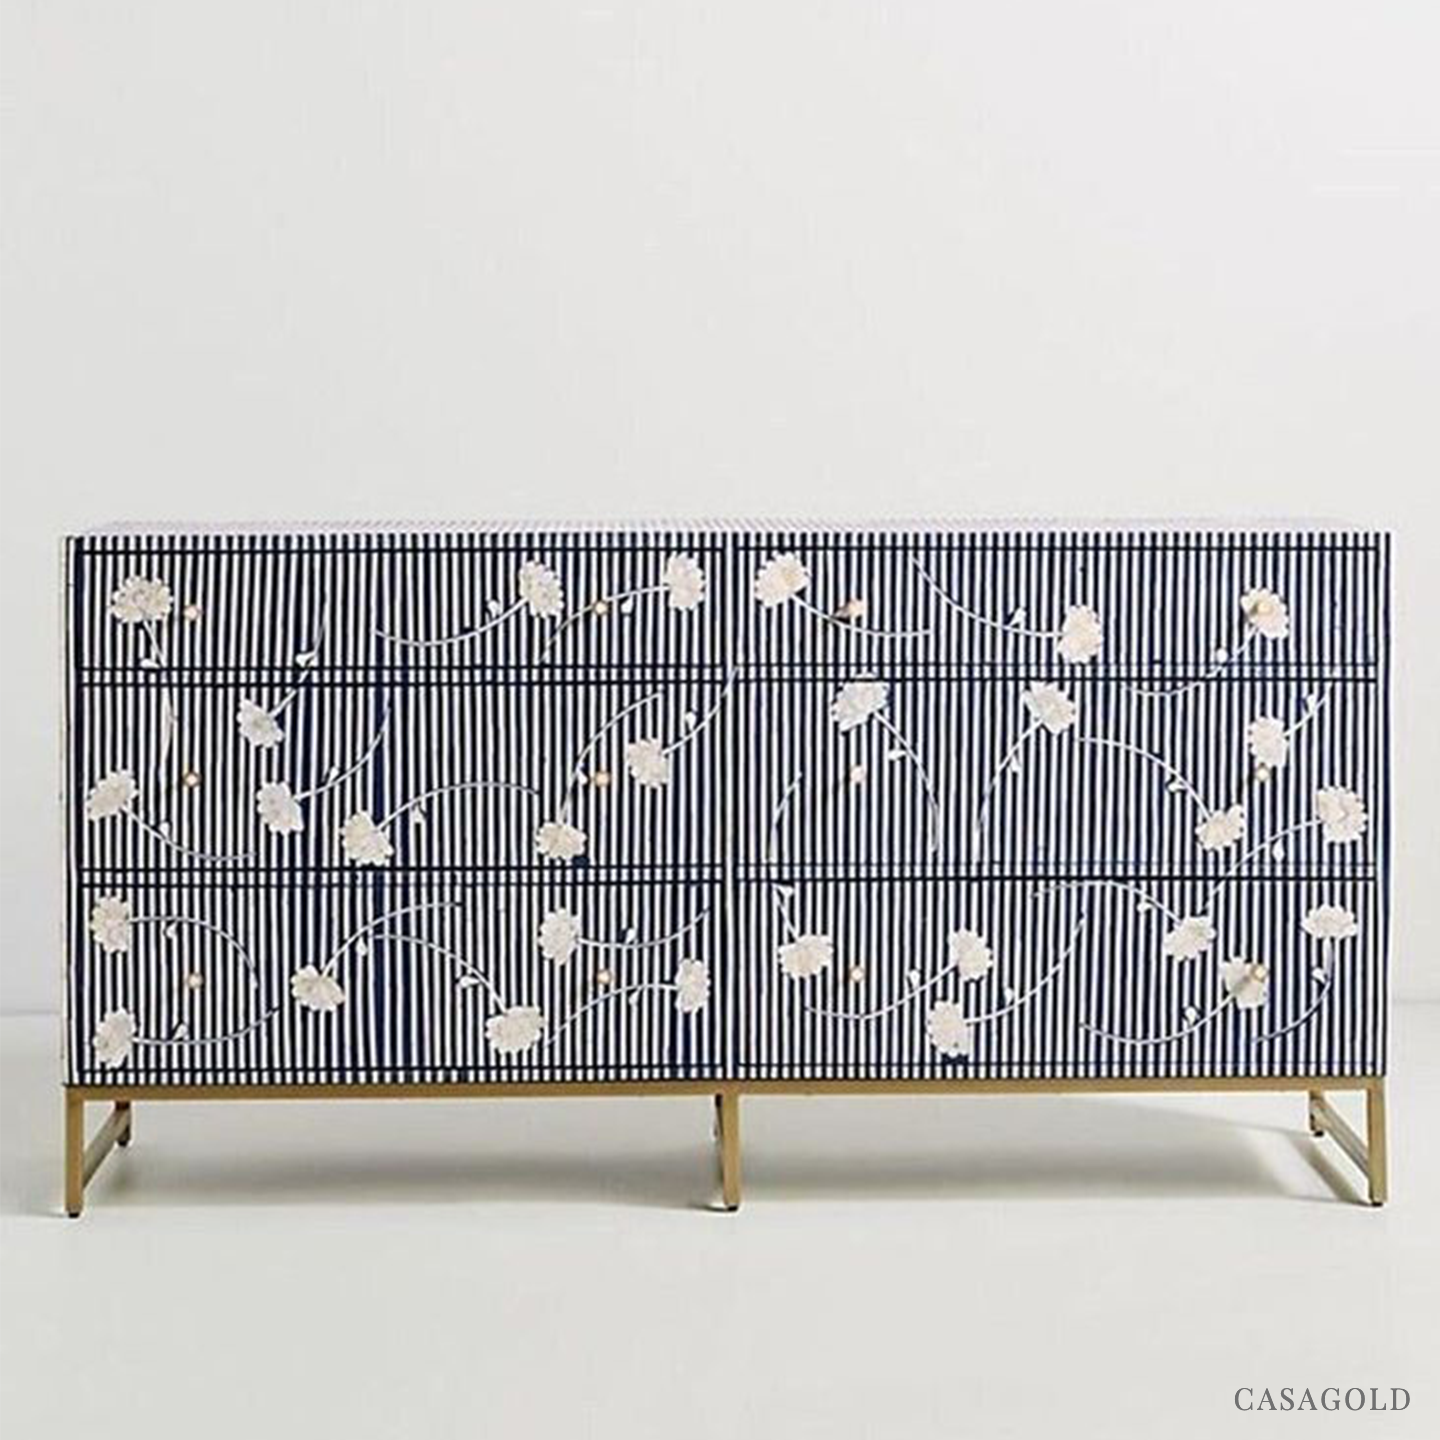 Floral Inlay Cabinet - Blossom Stripe